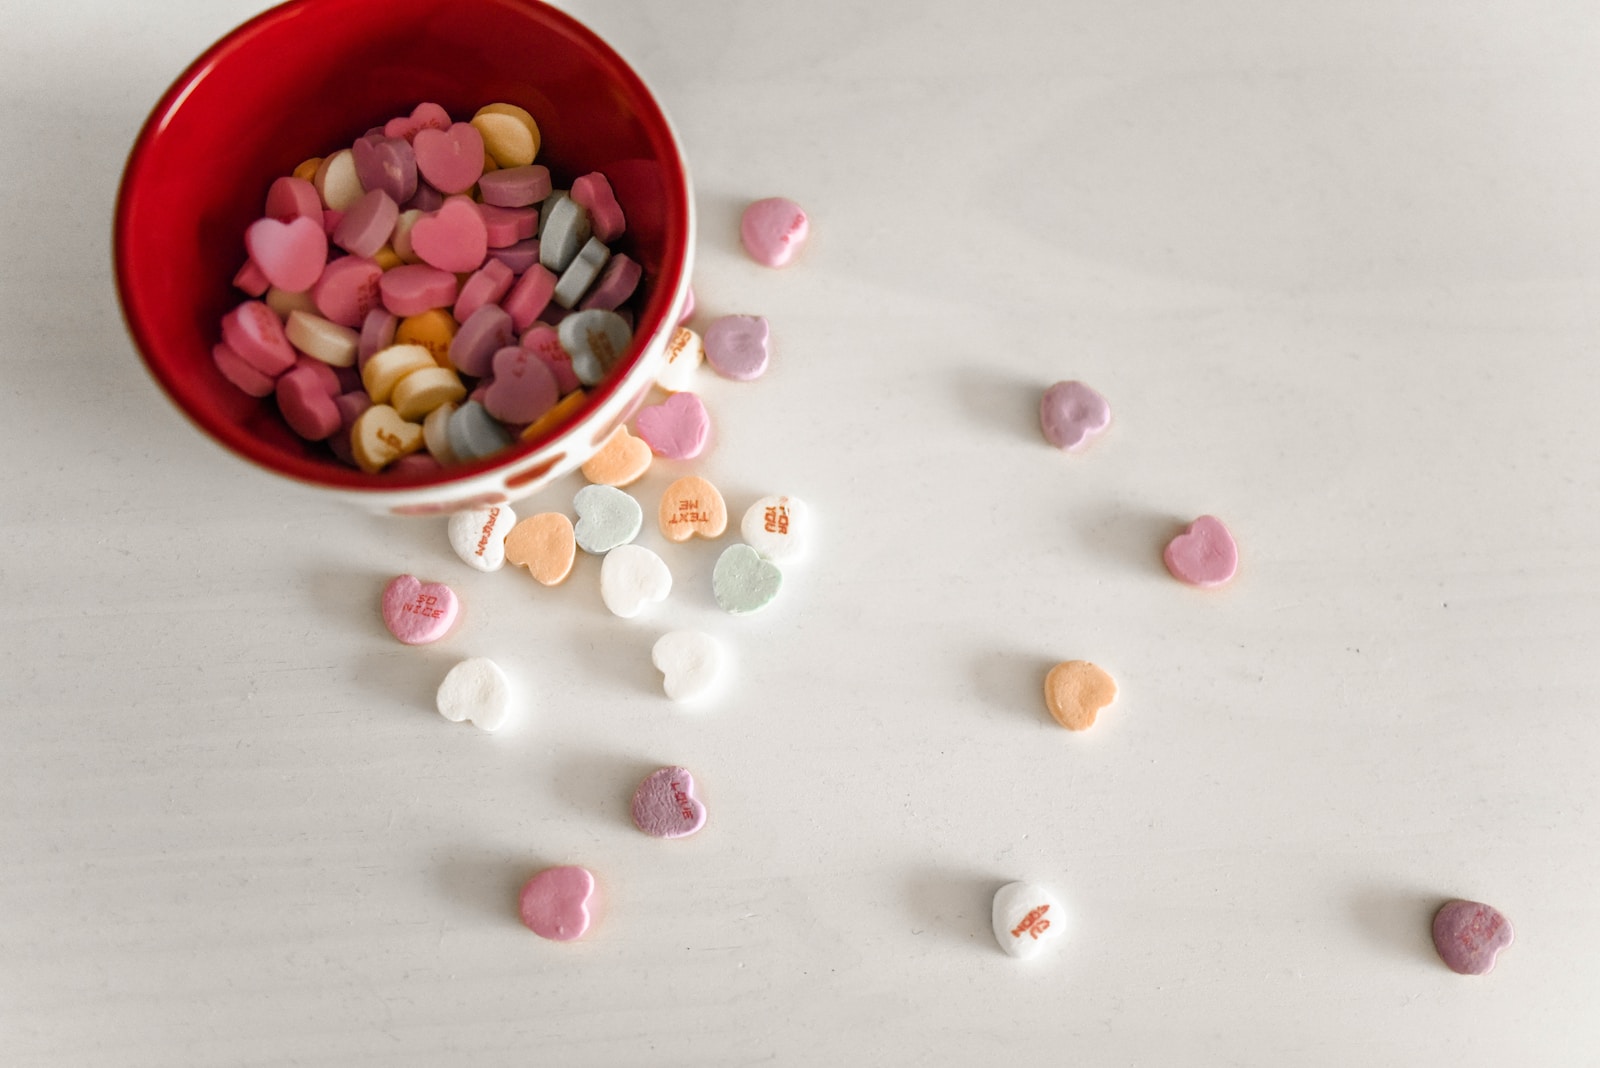 assorted-color candies and red and white ceramic bowl